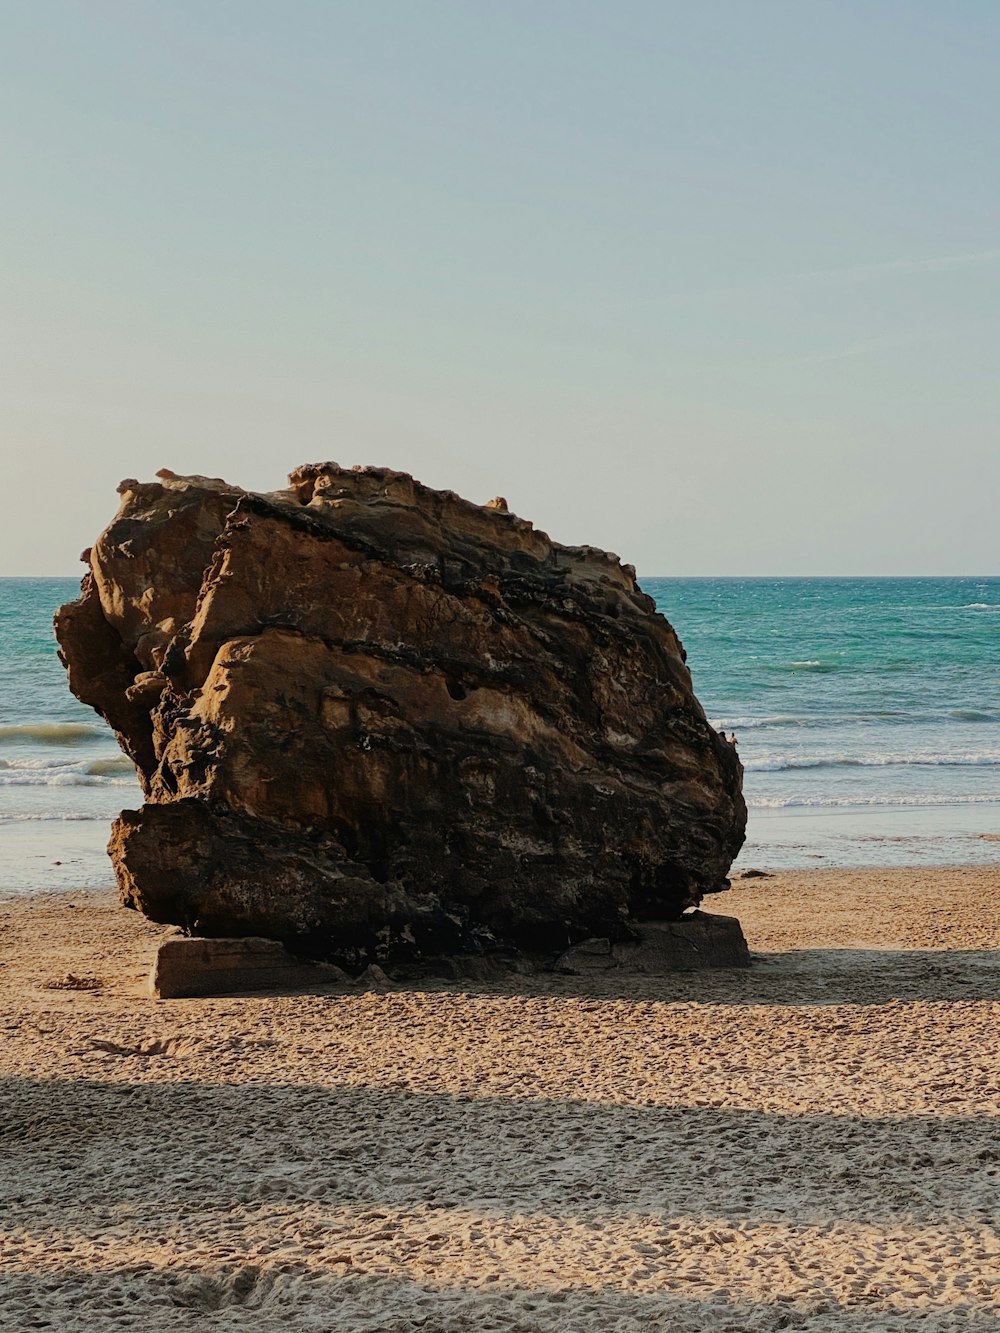 brown rock formation on beach during daytime